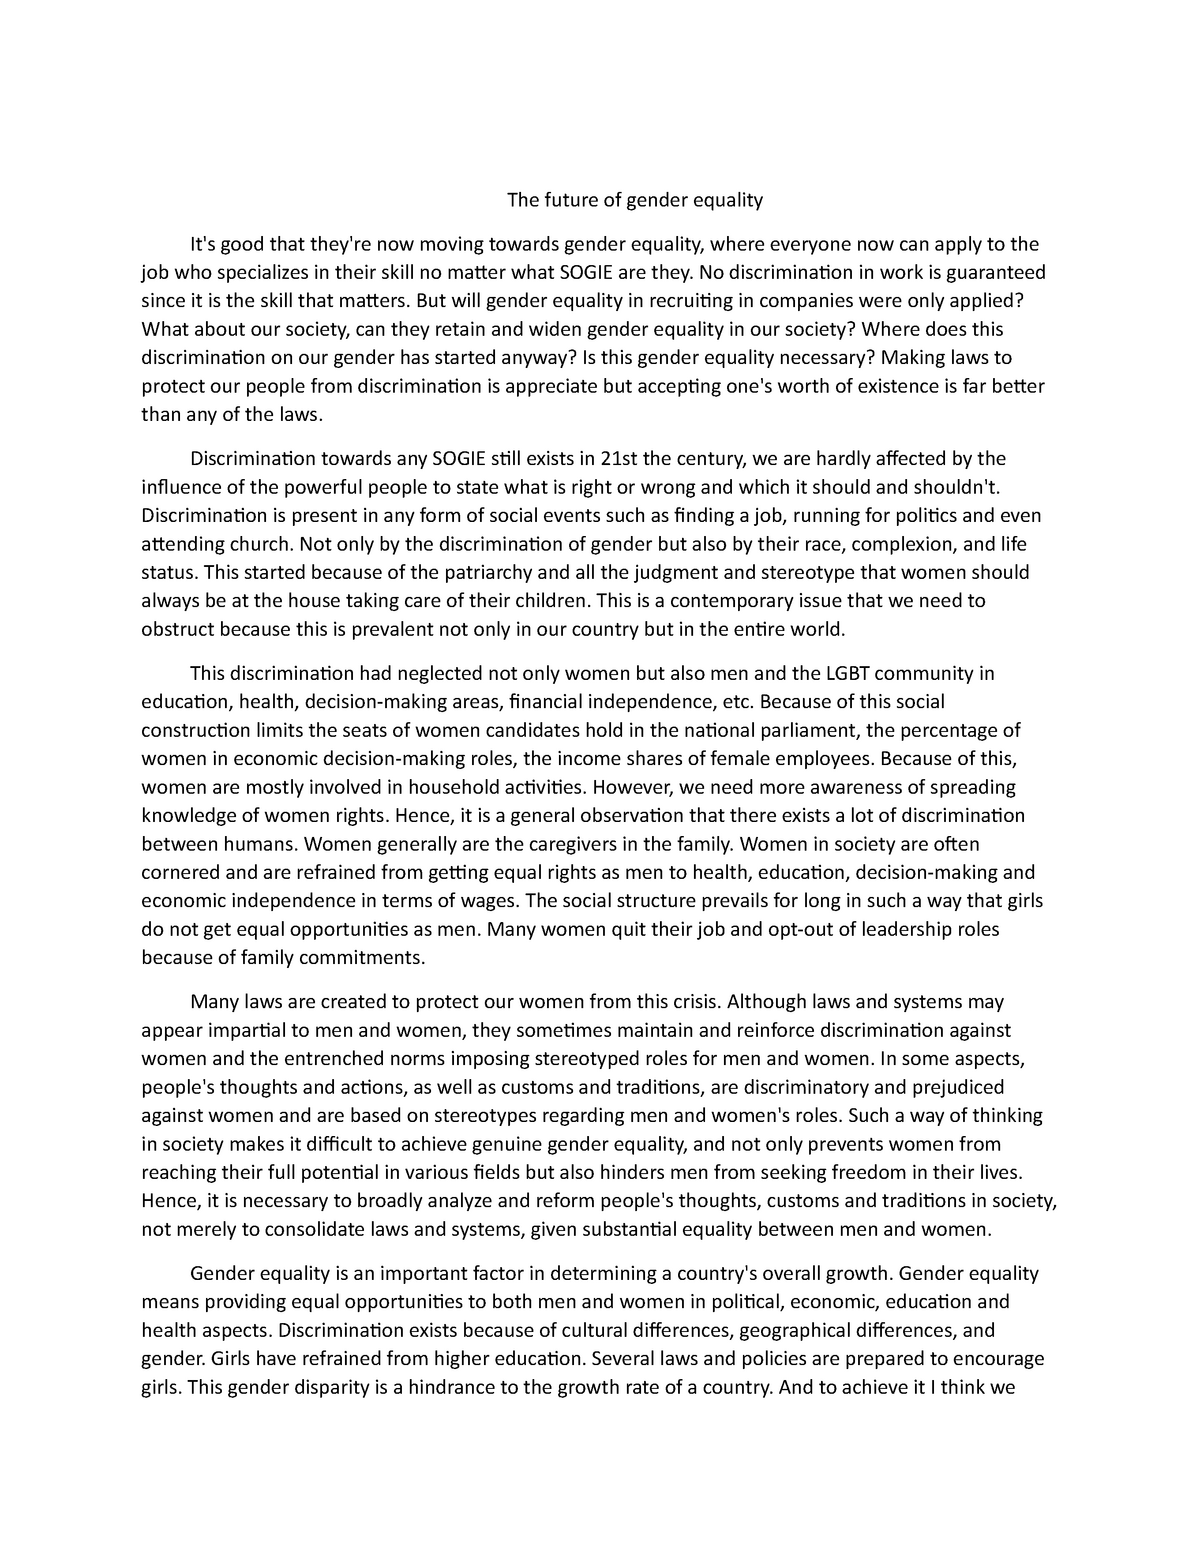 the future gender equality response essay